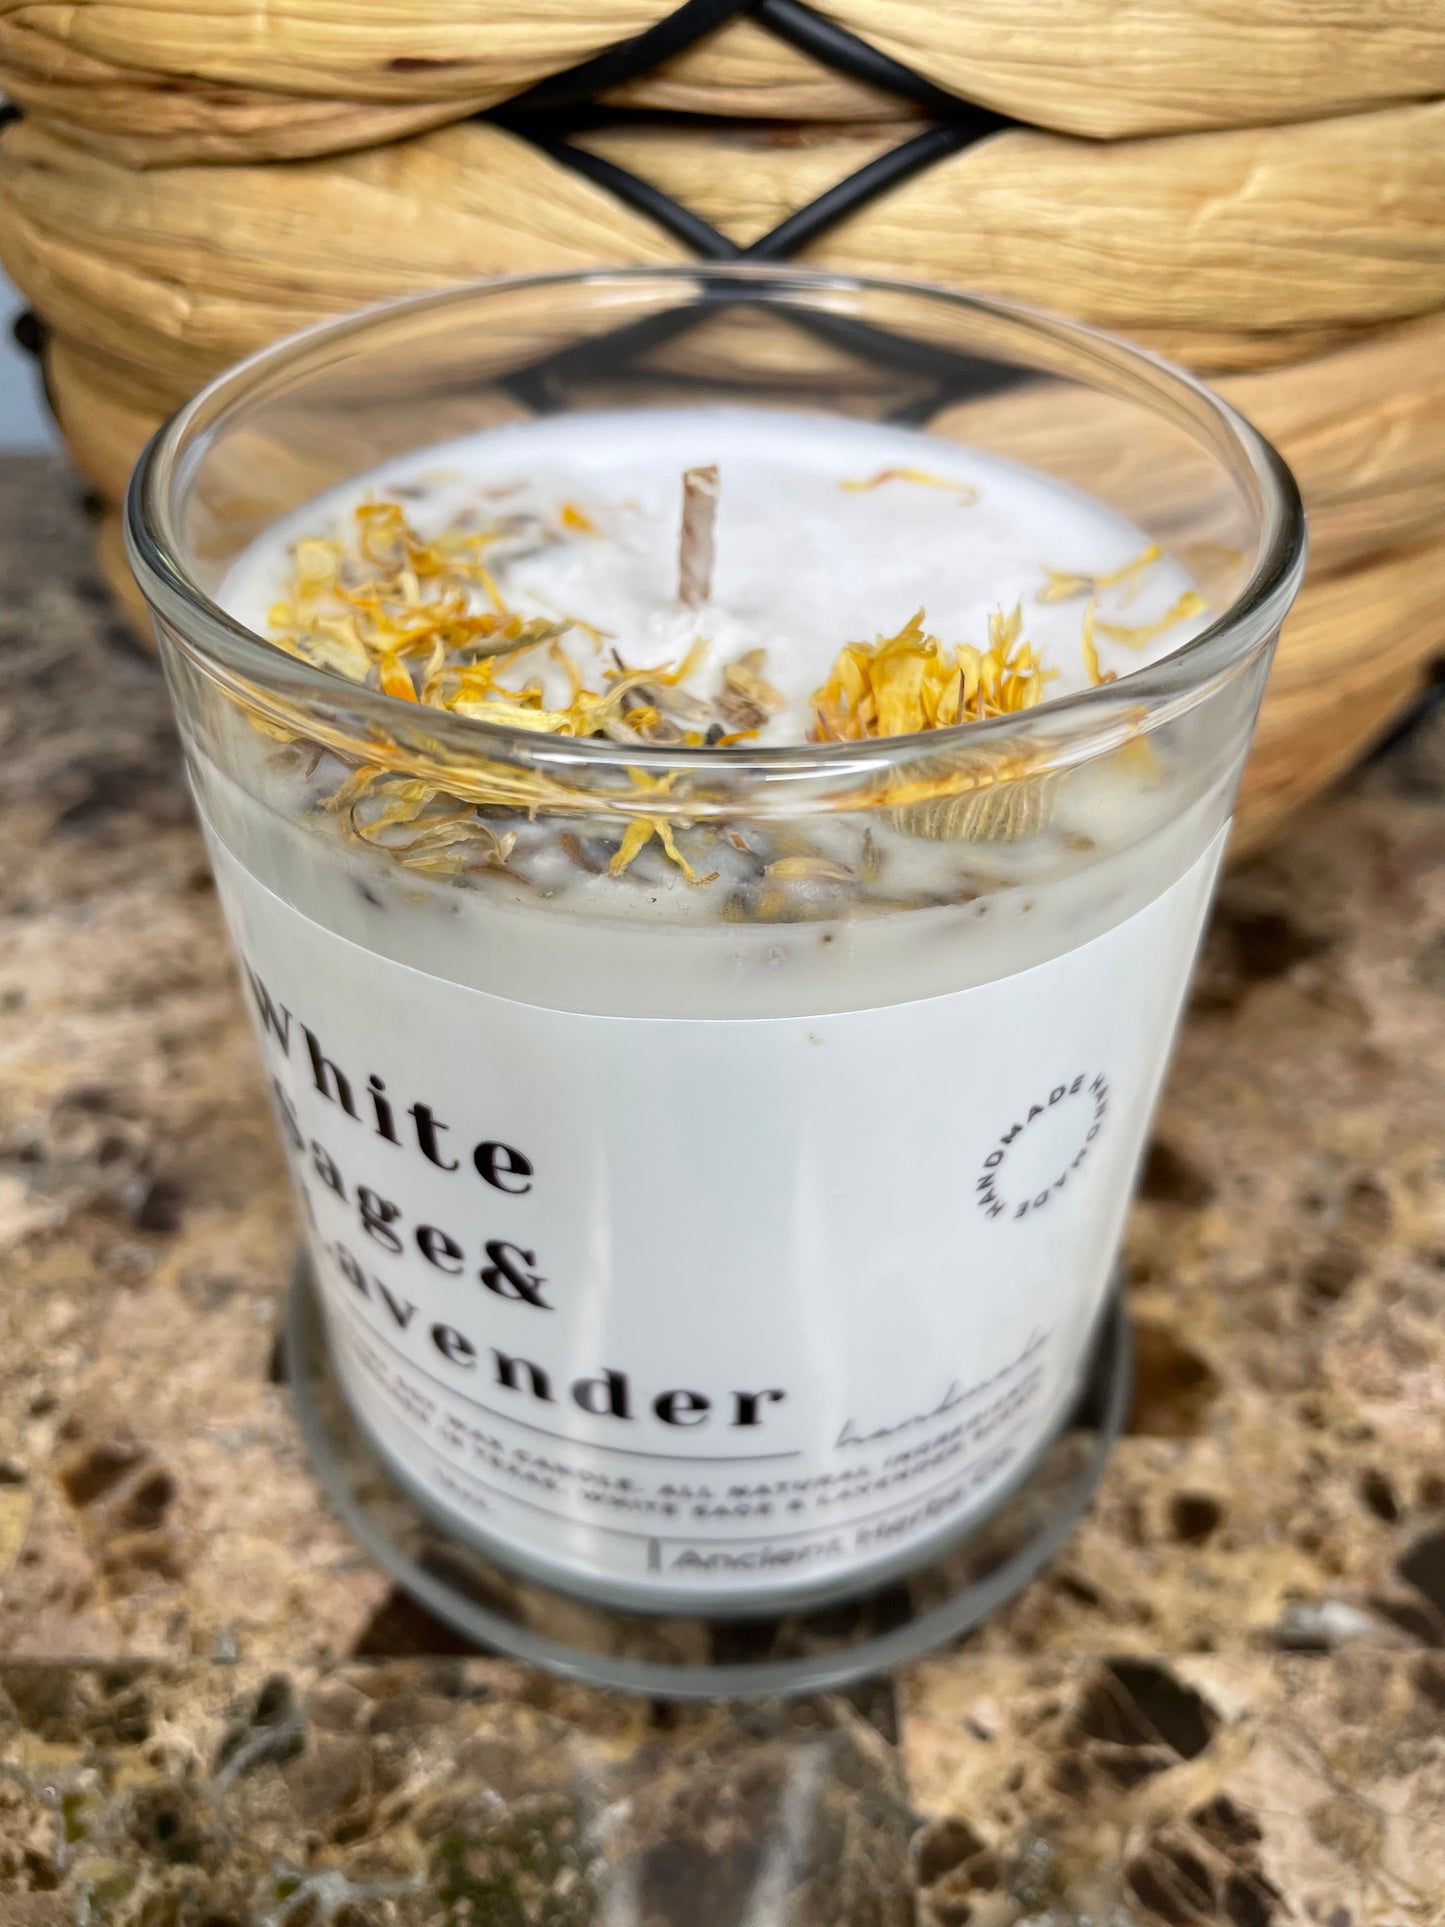 White Sage & Lavender Soy wax candle